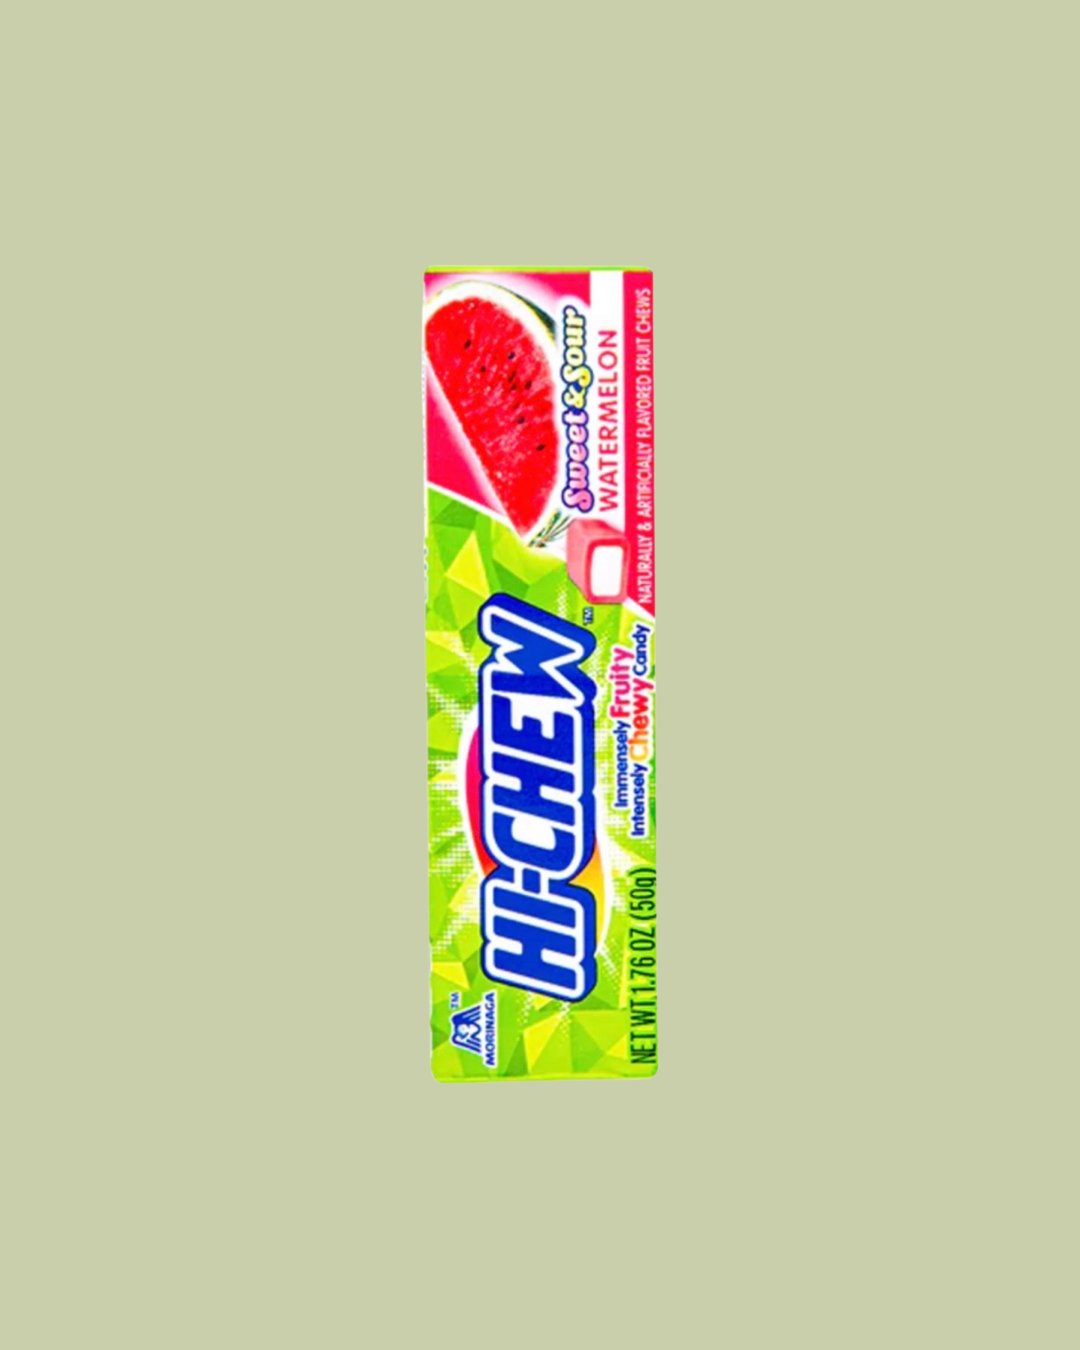 Hi-Chew Sweet and Sour Watermelon